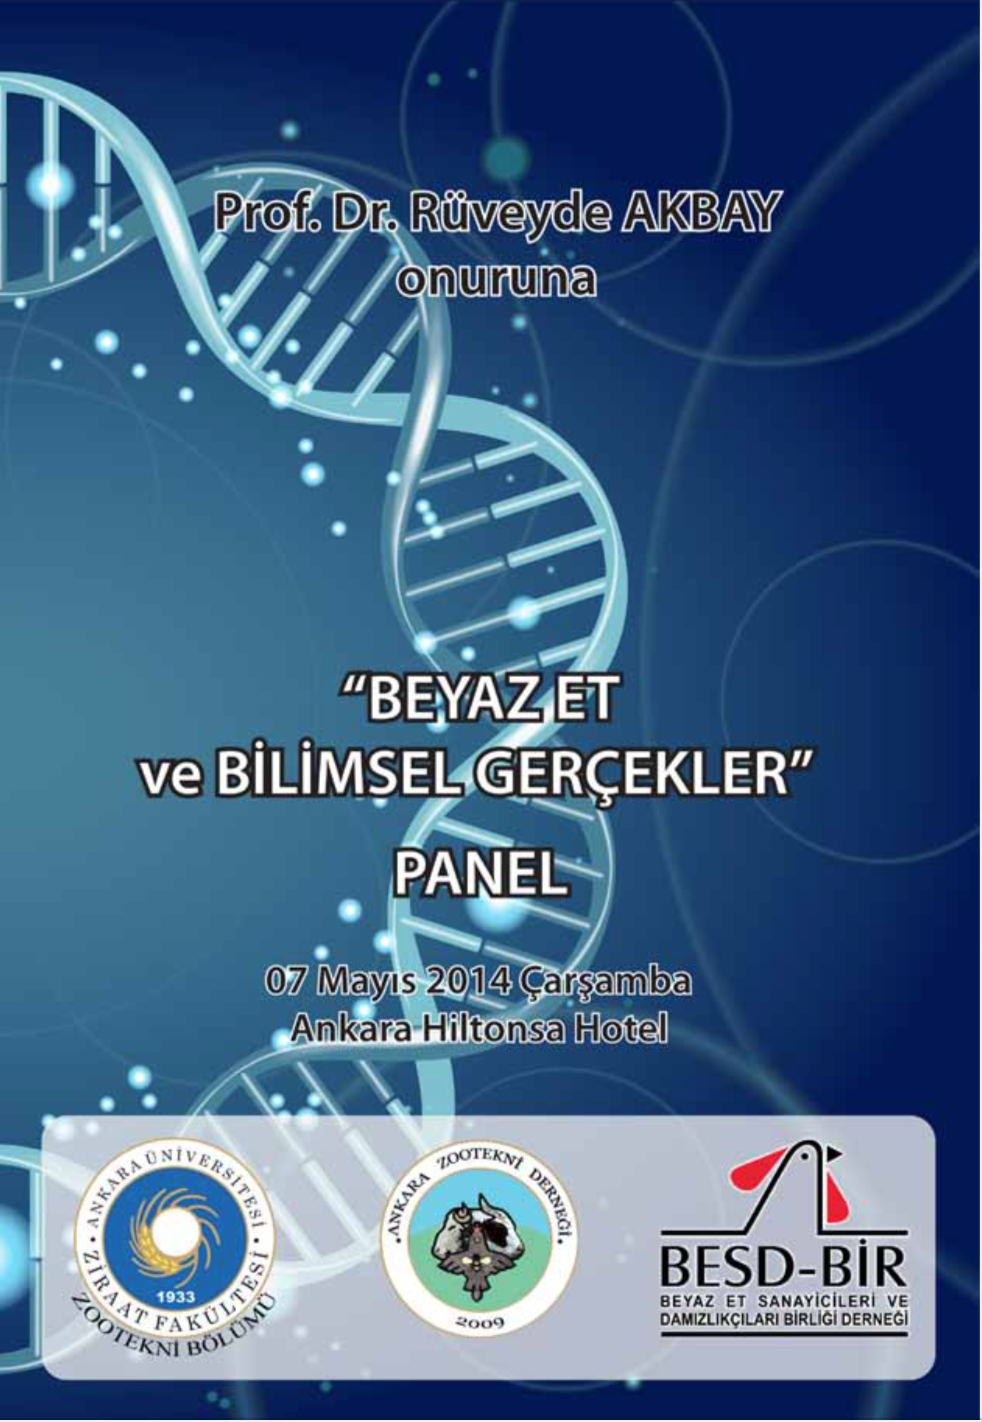 Poultry Meat and Scientific Facts Panel Held in Ankara